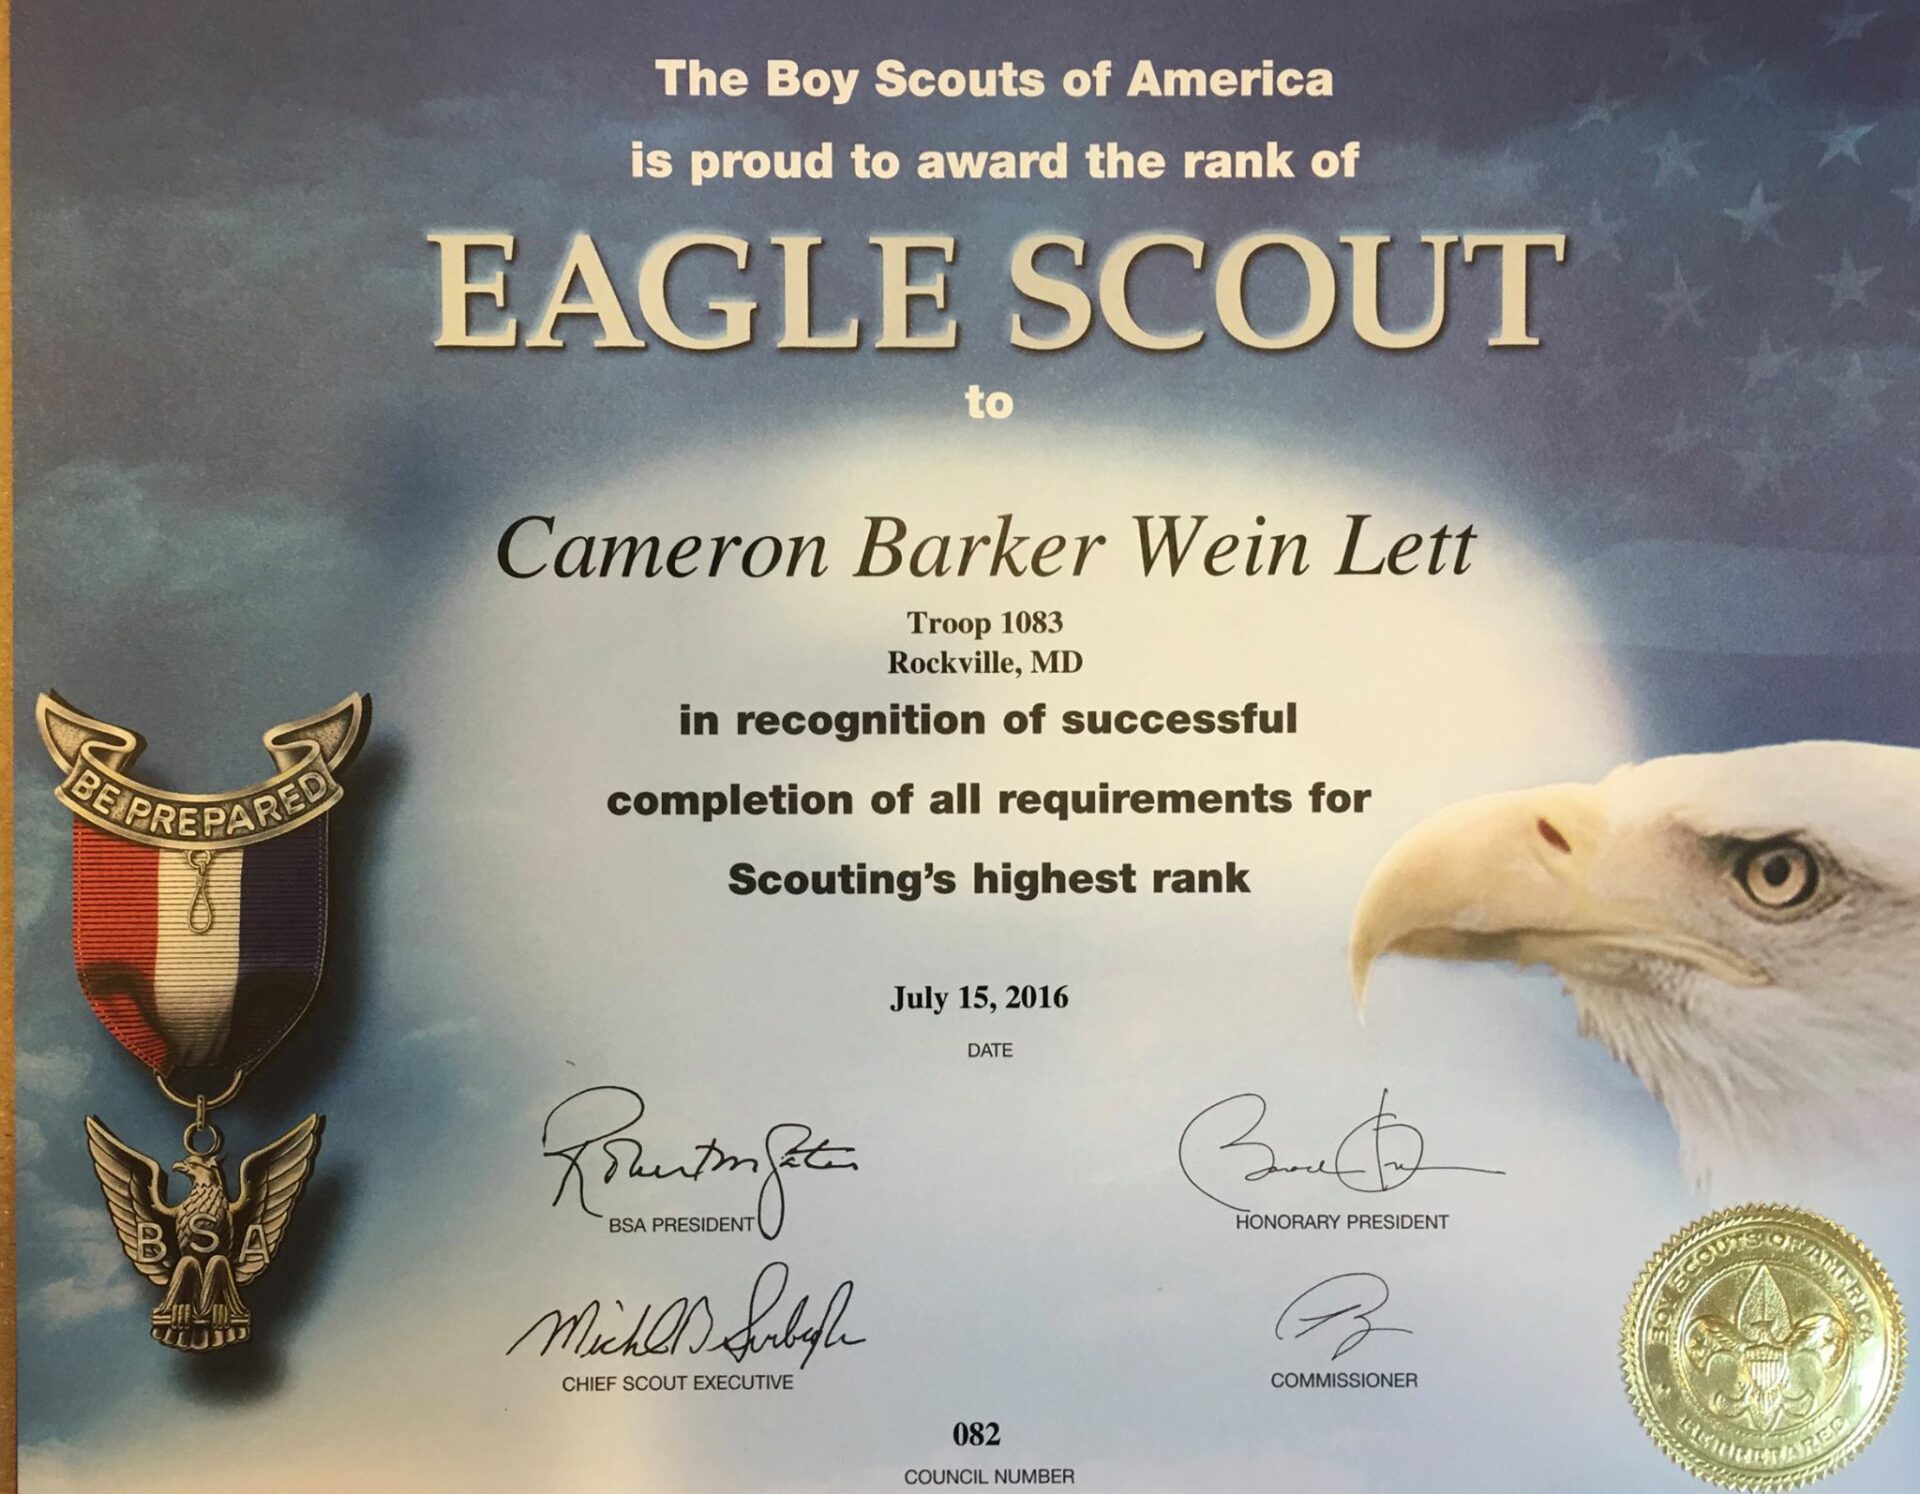 Certificate of Recognition from The Boy Scouts of America